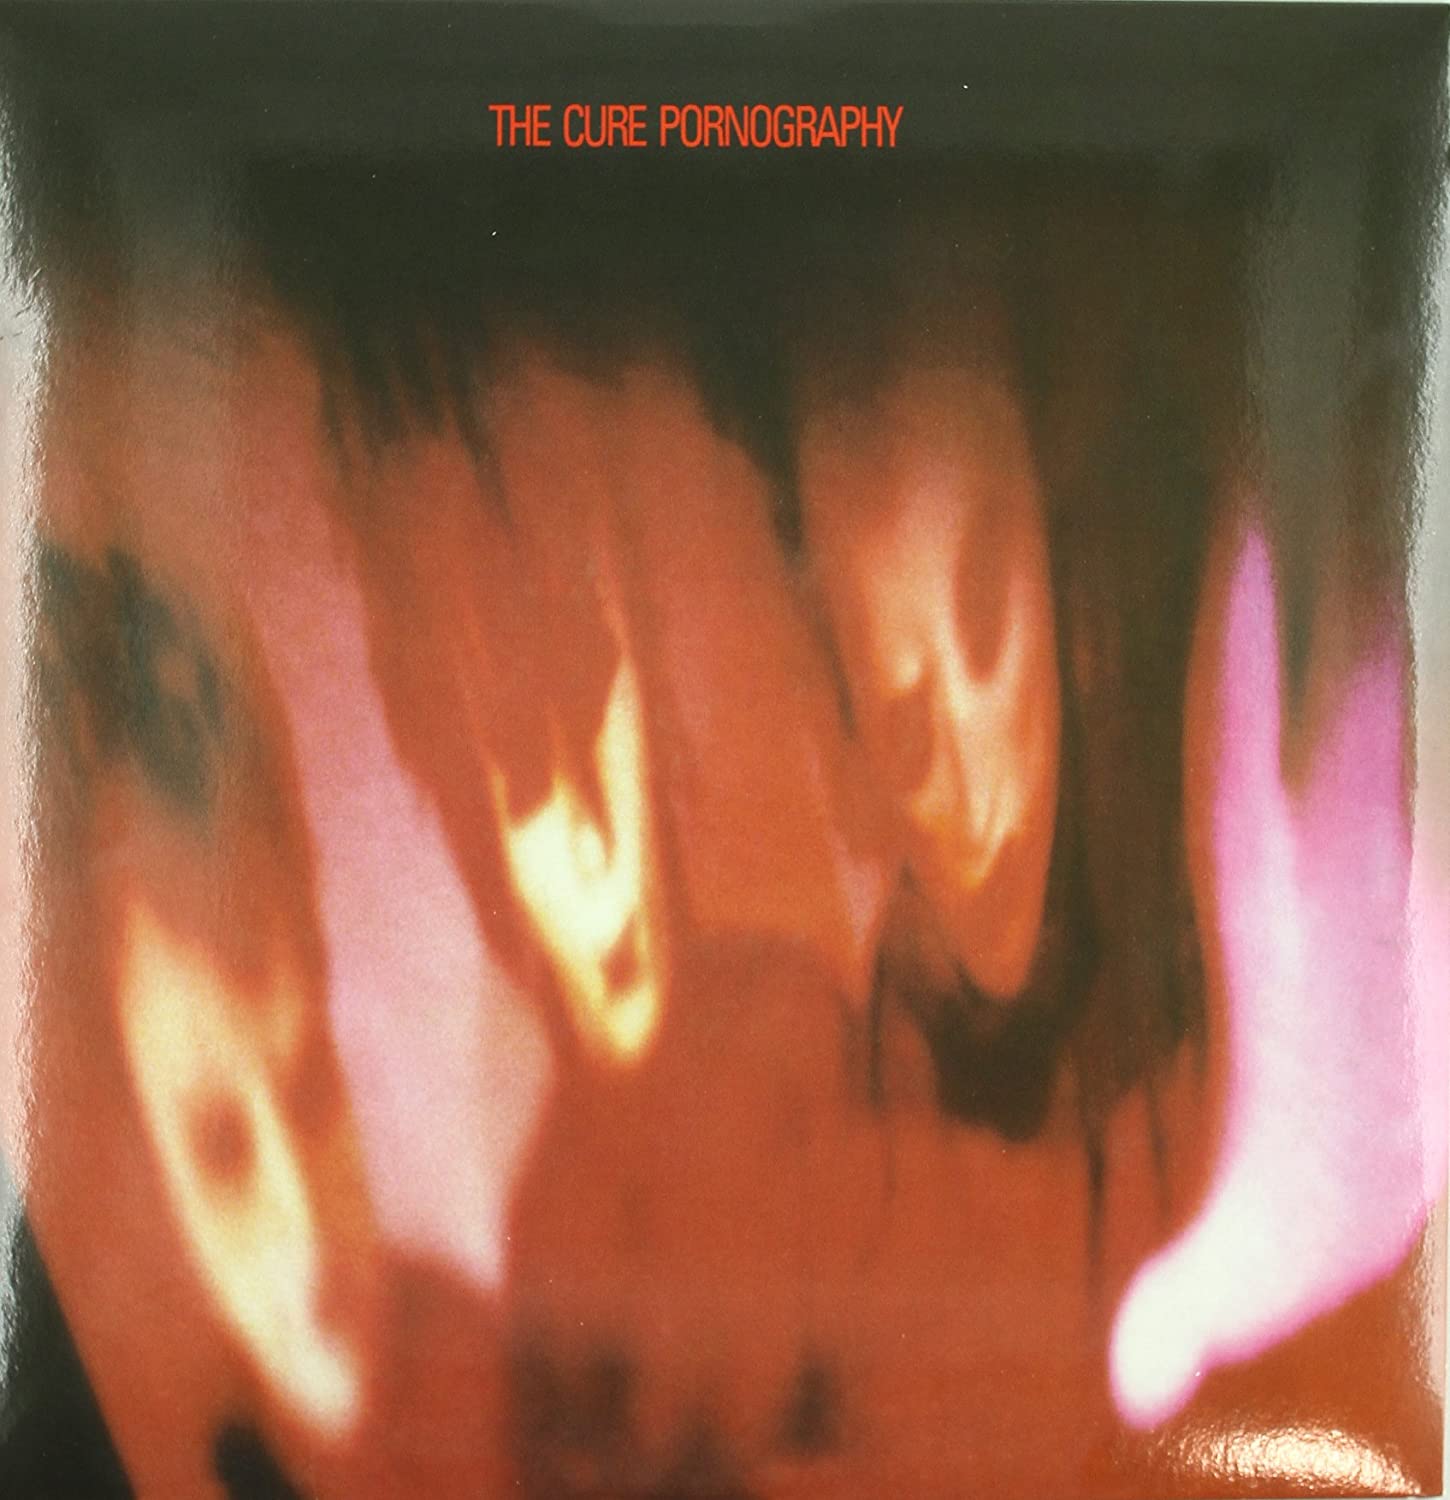 Limited Edition Red Vinyl of Pornography from The Cure.